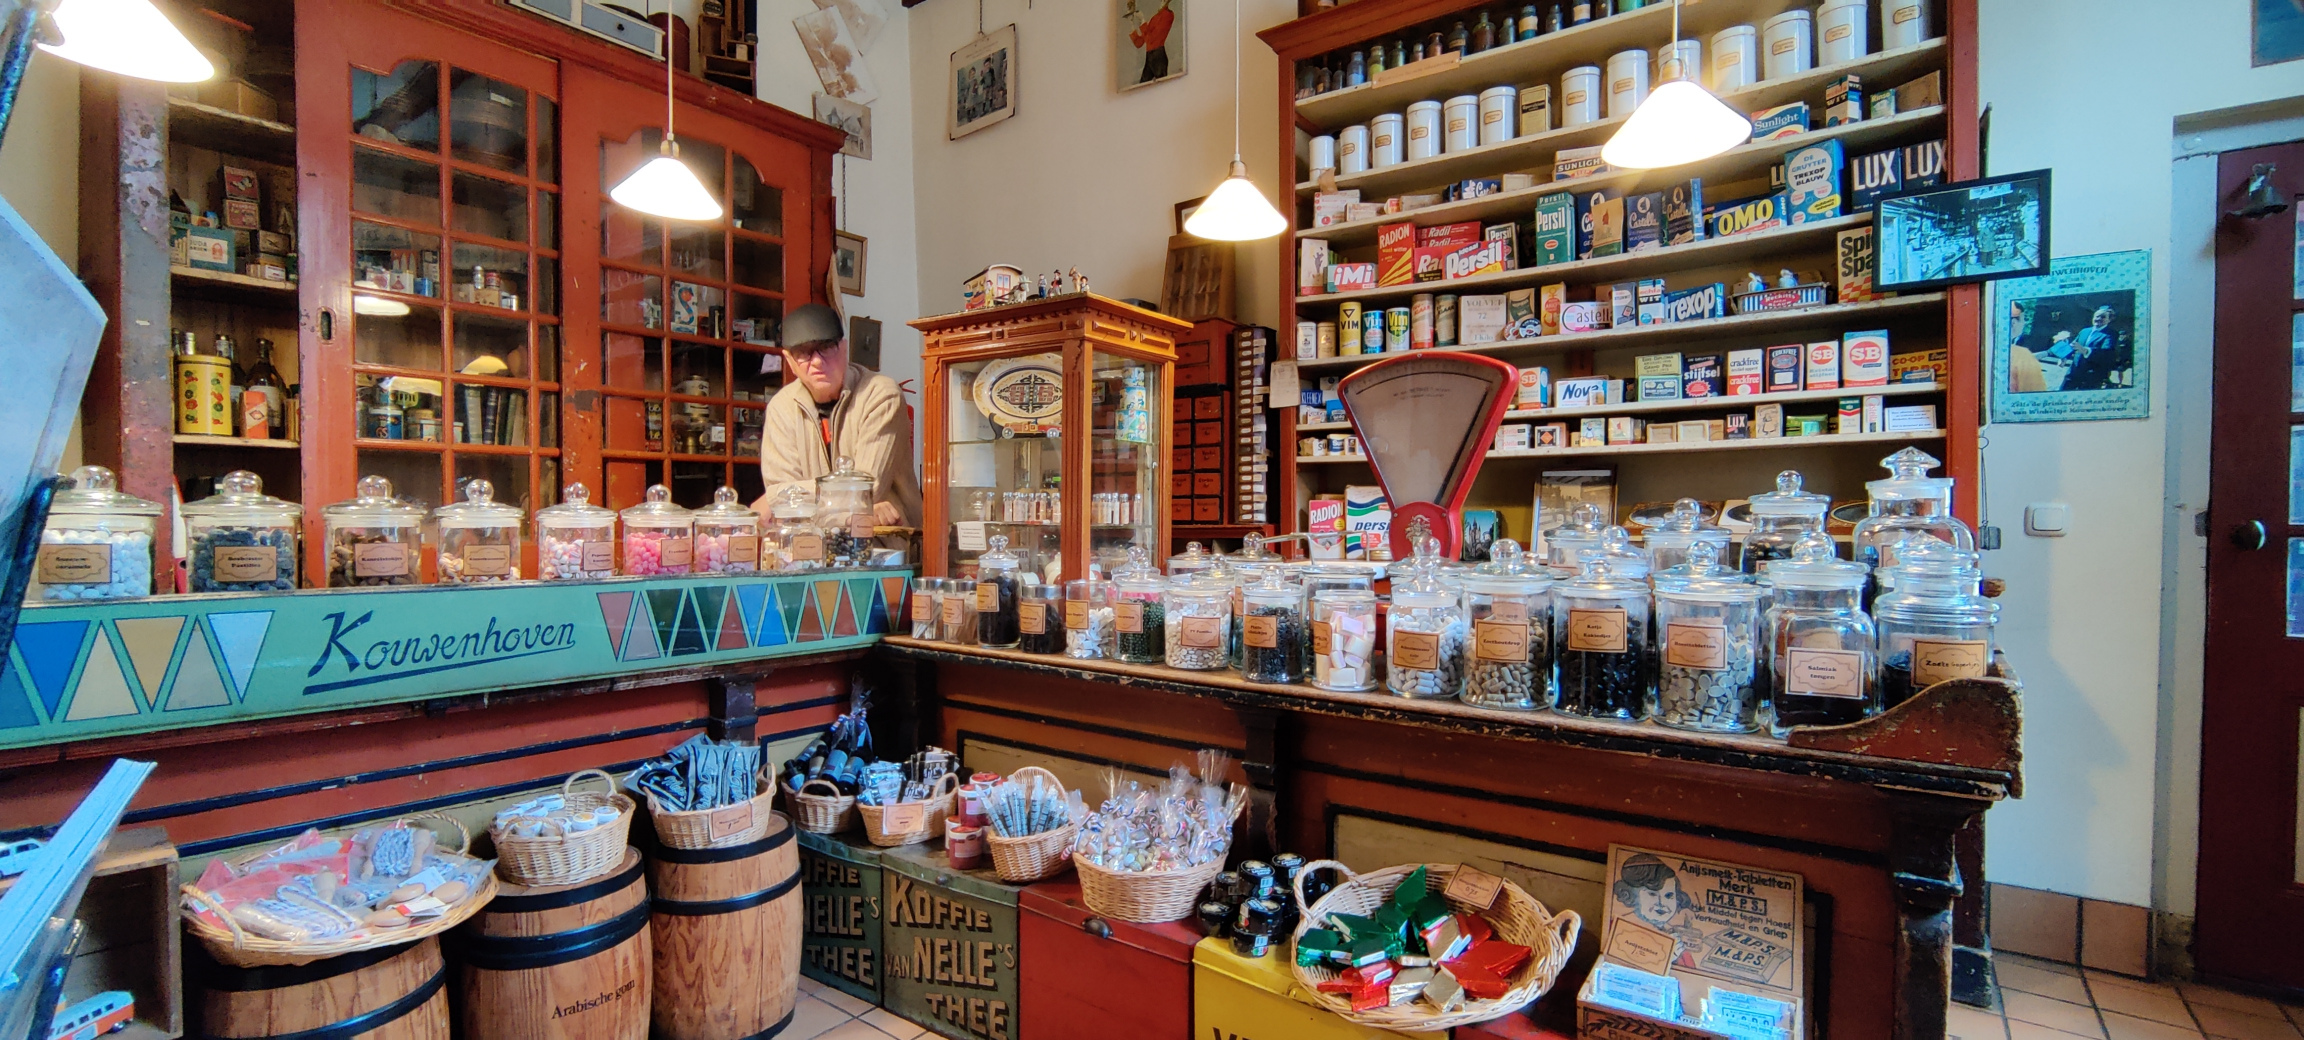 An overview of the interior of a Dutch classic candy store